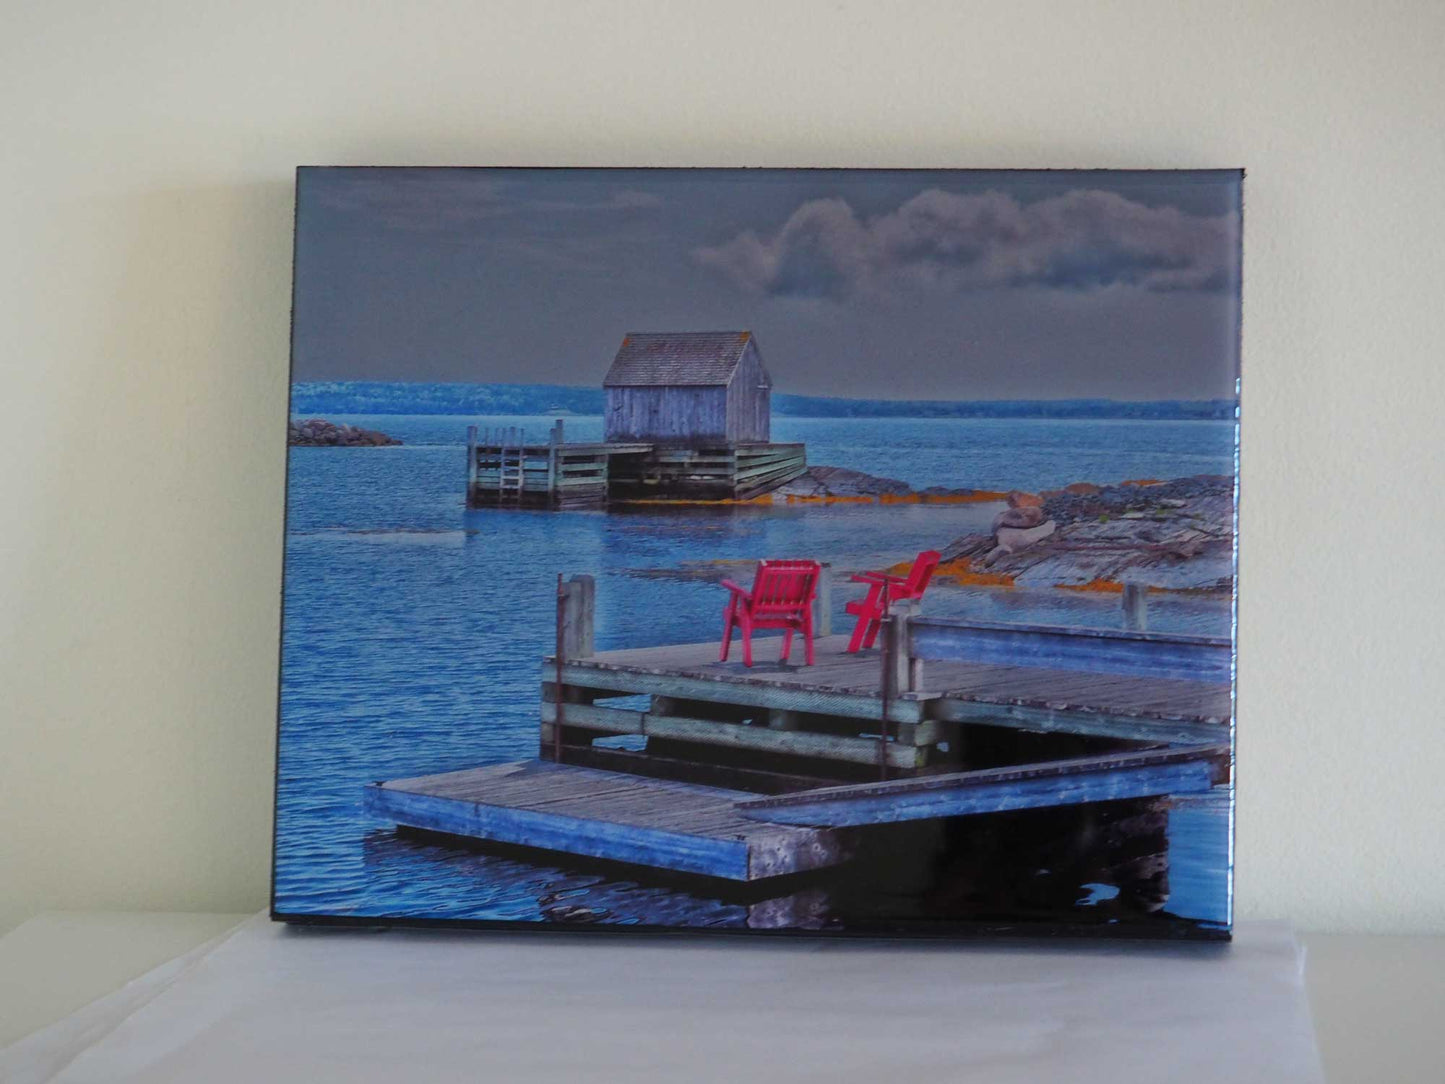 Unique and charming spot in Nova Scotia. Blue Rocks, a cozy little harbor with lots of little fishing shacks. It's still a working fishing village, with blue slate rocks at the ocean's edge. Photography 8 x 10 inches covered with resin. Ready-to-hang in your favorite room.